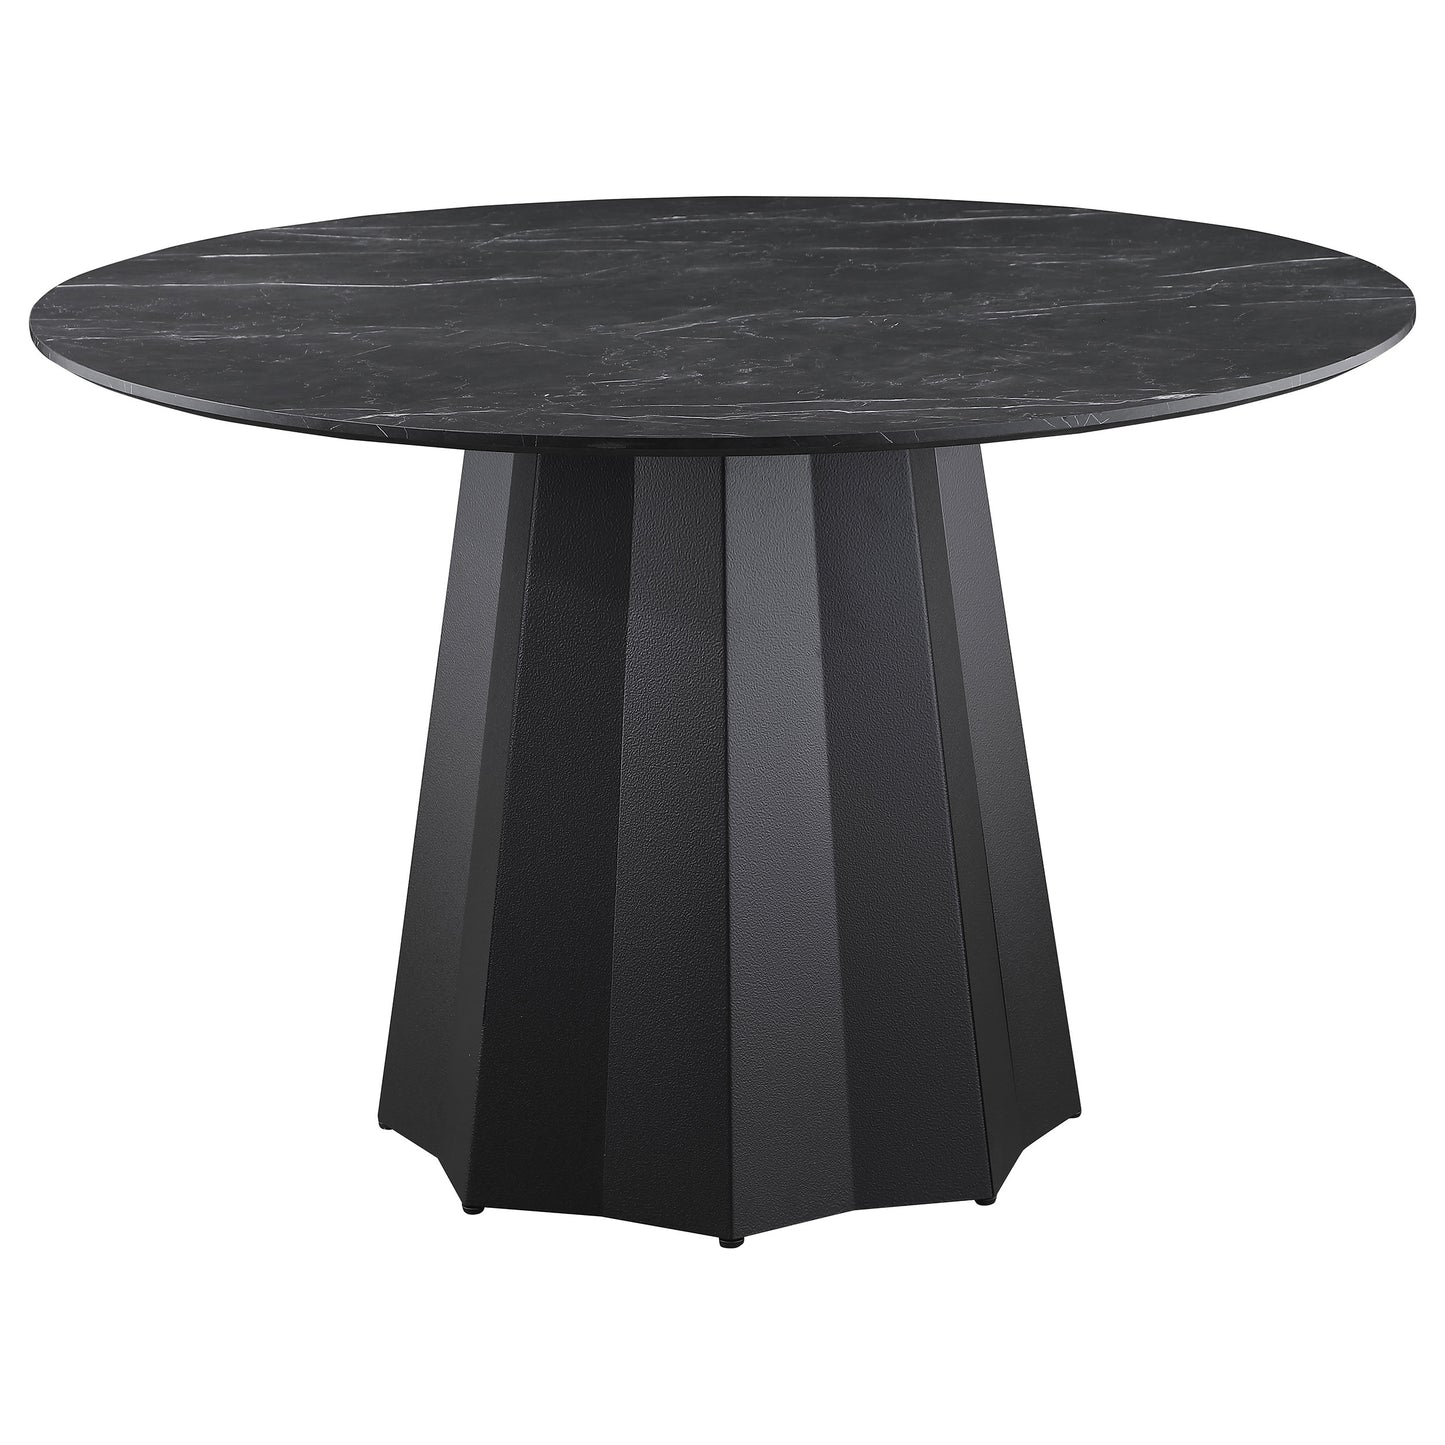 Camden 5-piece Round Faux Marble Top Dining Table Set Black